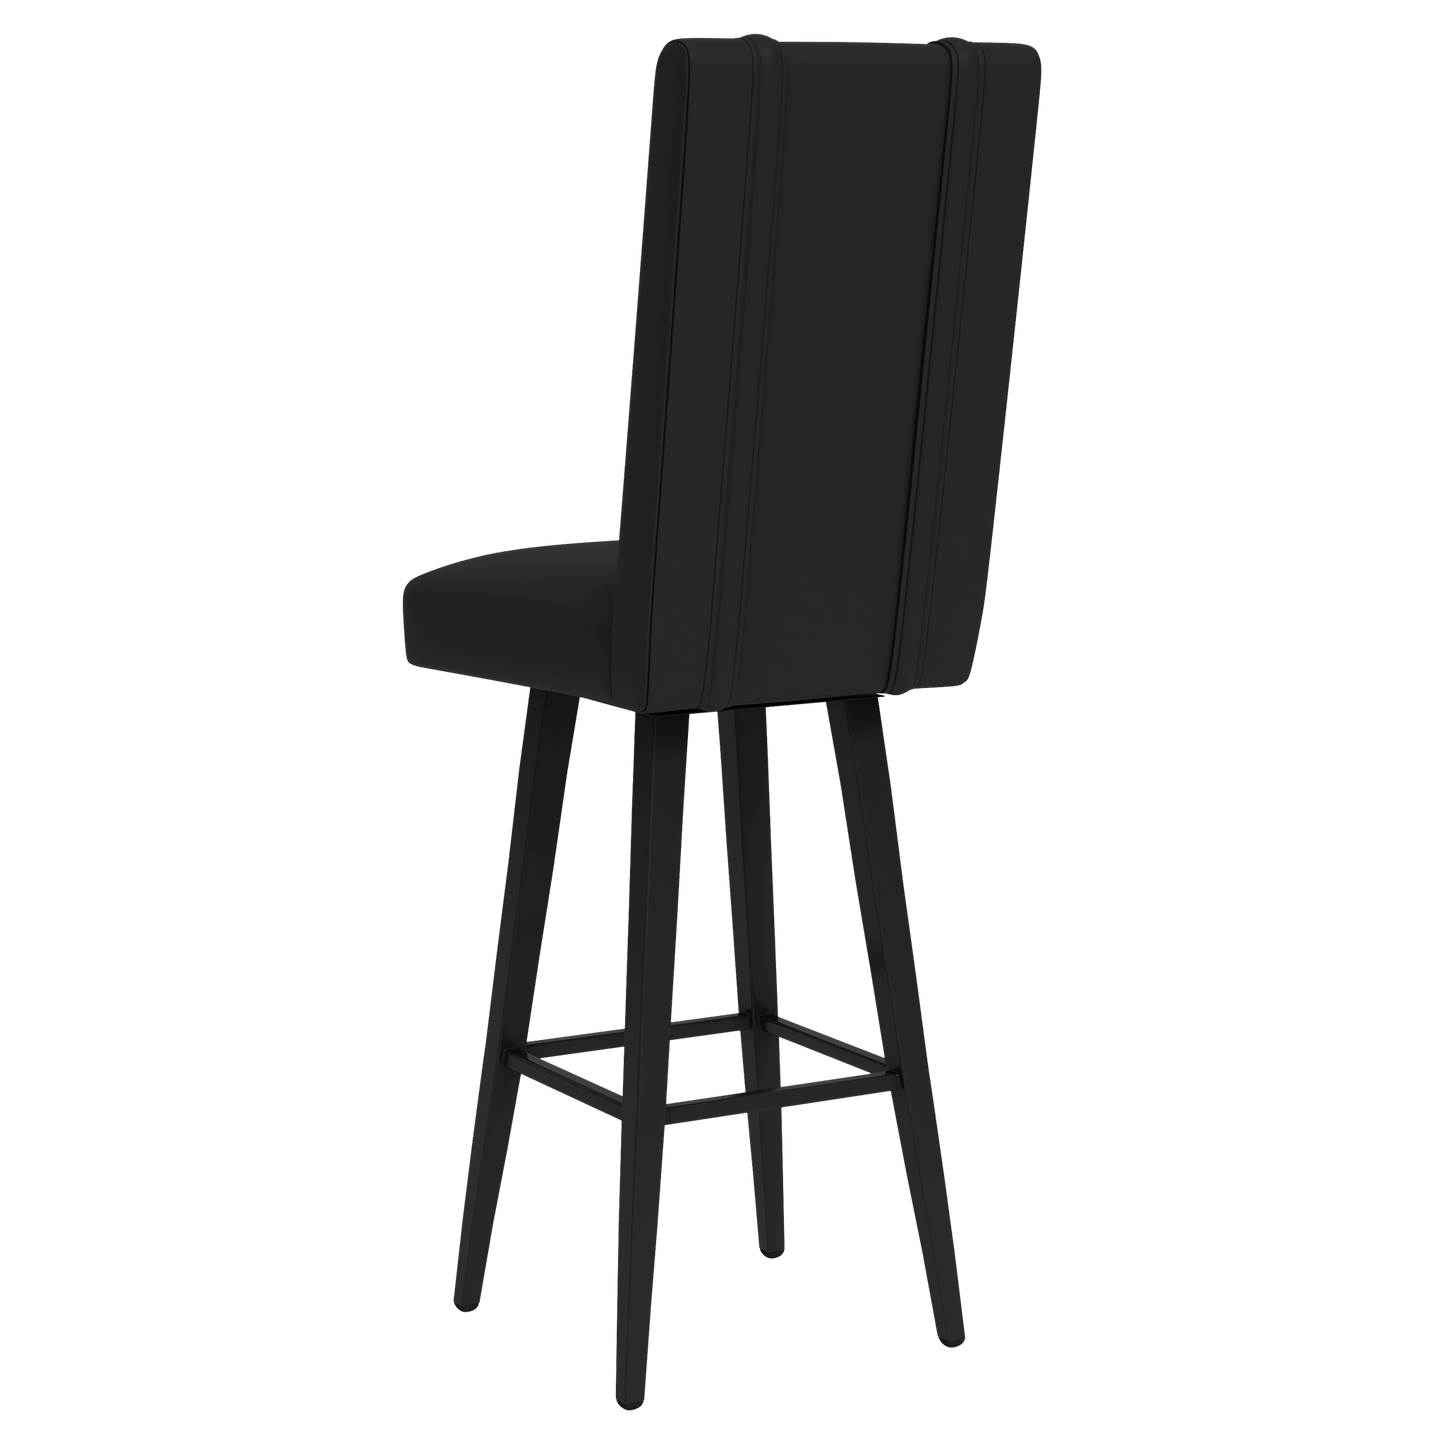 Swivel Bar Stool 2000 with New Orleans Pelicans NOLA